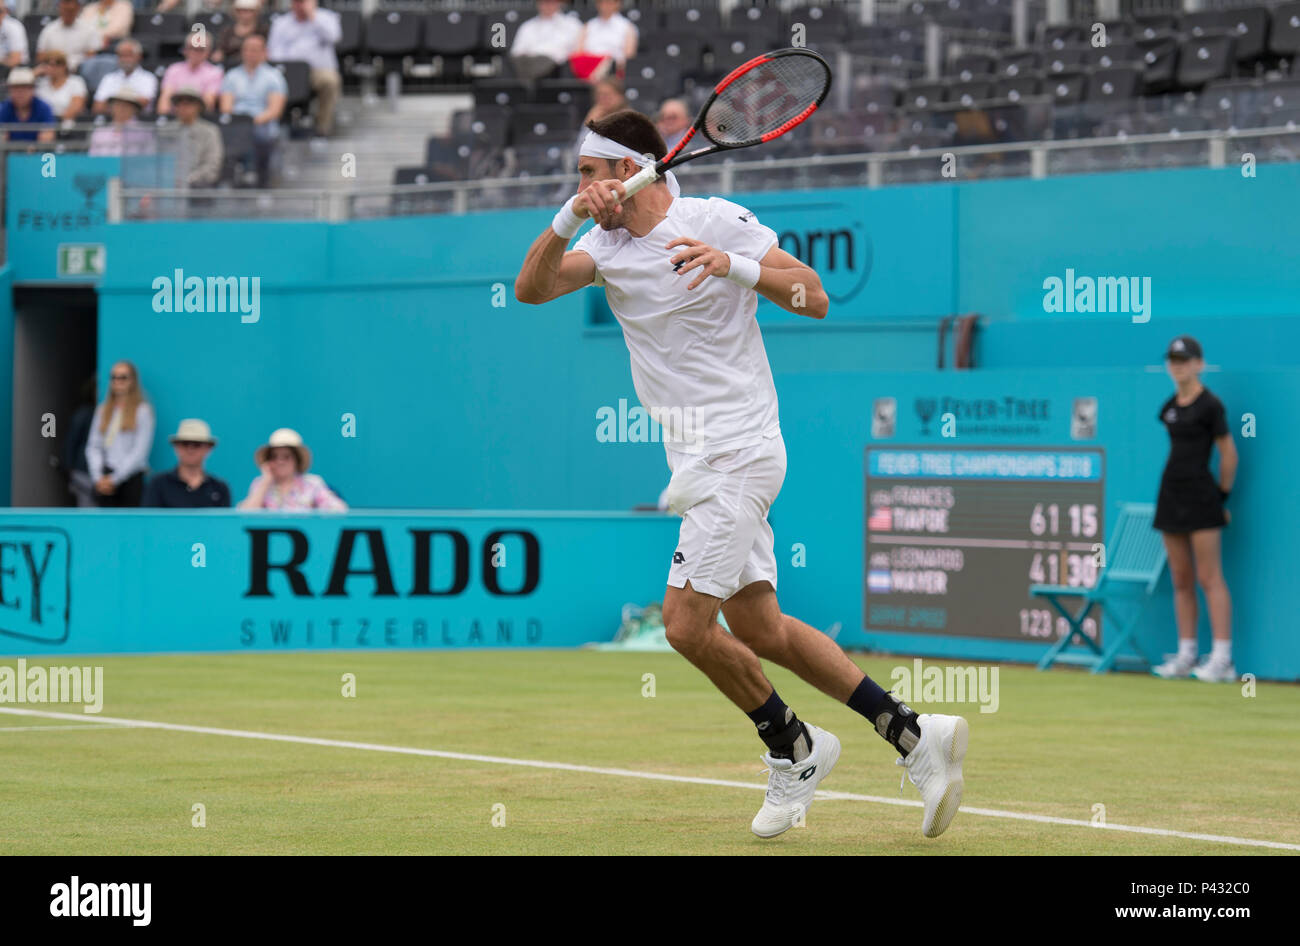 The Queen’s Club, London, UK. 20 June, 2018. Day 3 of the Fever Tree Championships on centre court with Frances Tiafoe (USA) vs Leonardo Mayer (ARG). Credit: Malcolm Park/Alamy Live News. Stock Photo